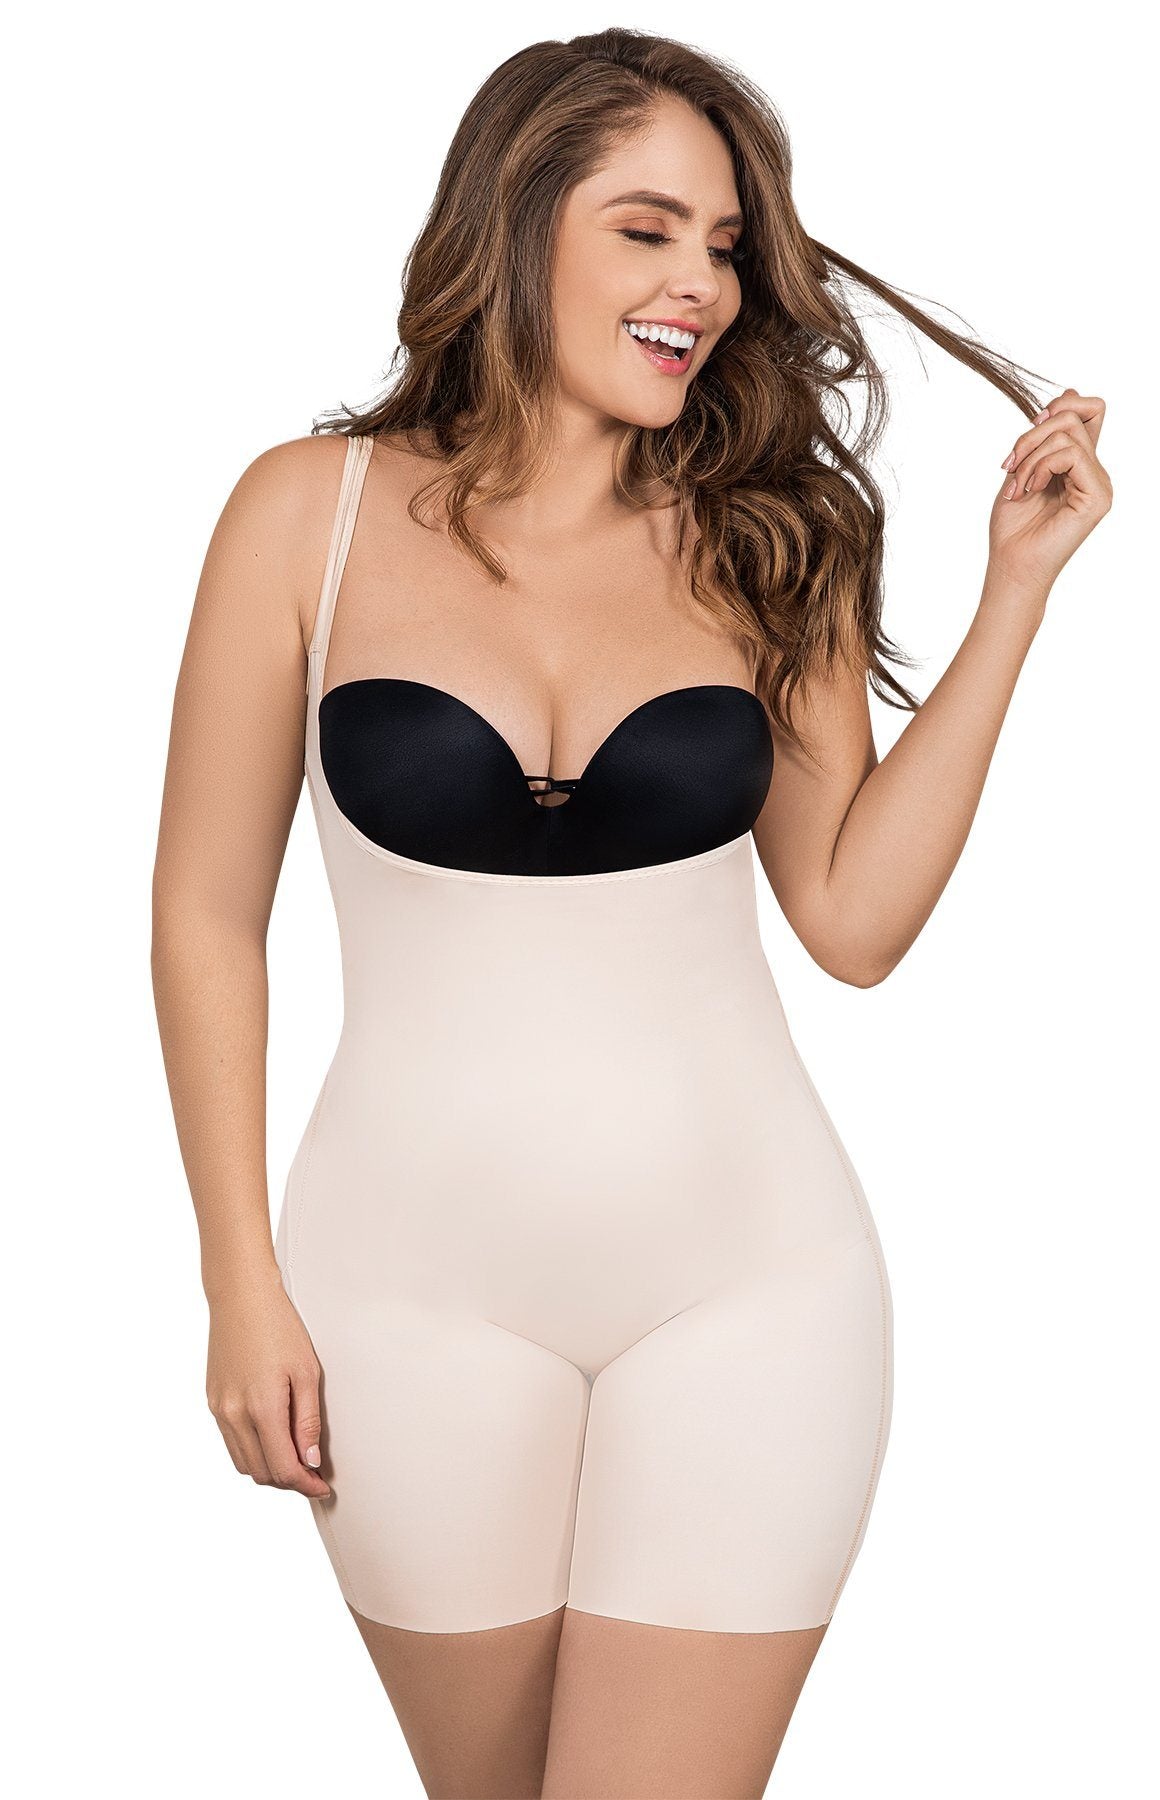 MID-THIGH SEAMLESS SHAPER - Silhouettes and Curves